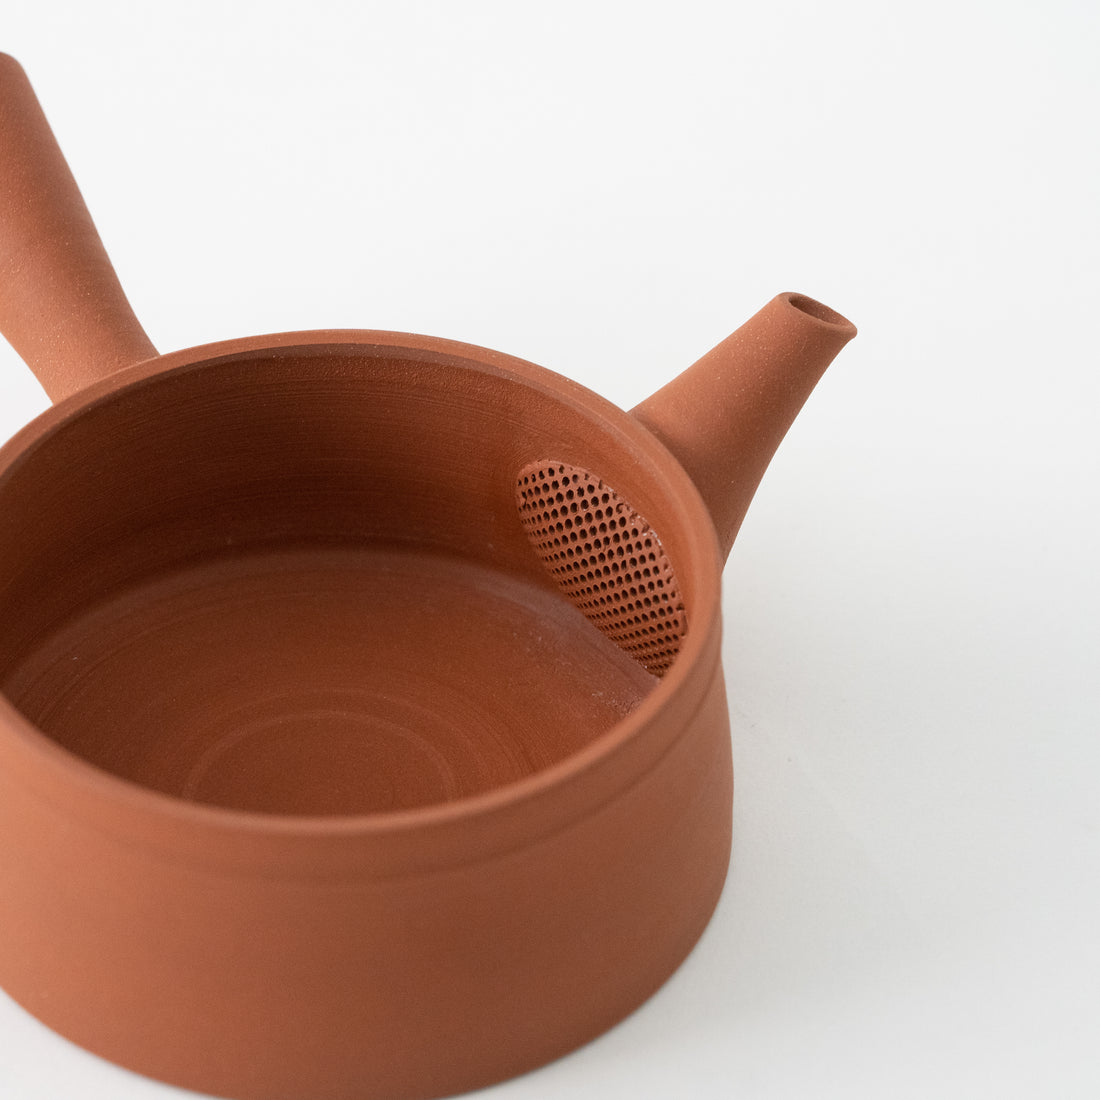 No.63 Red Clay Cylindrical Tea Pot